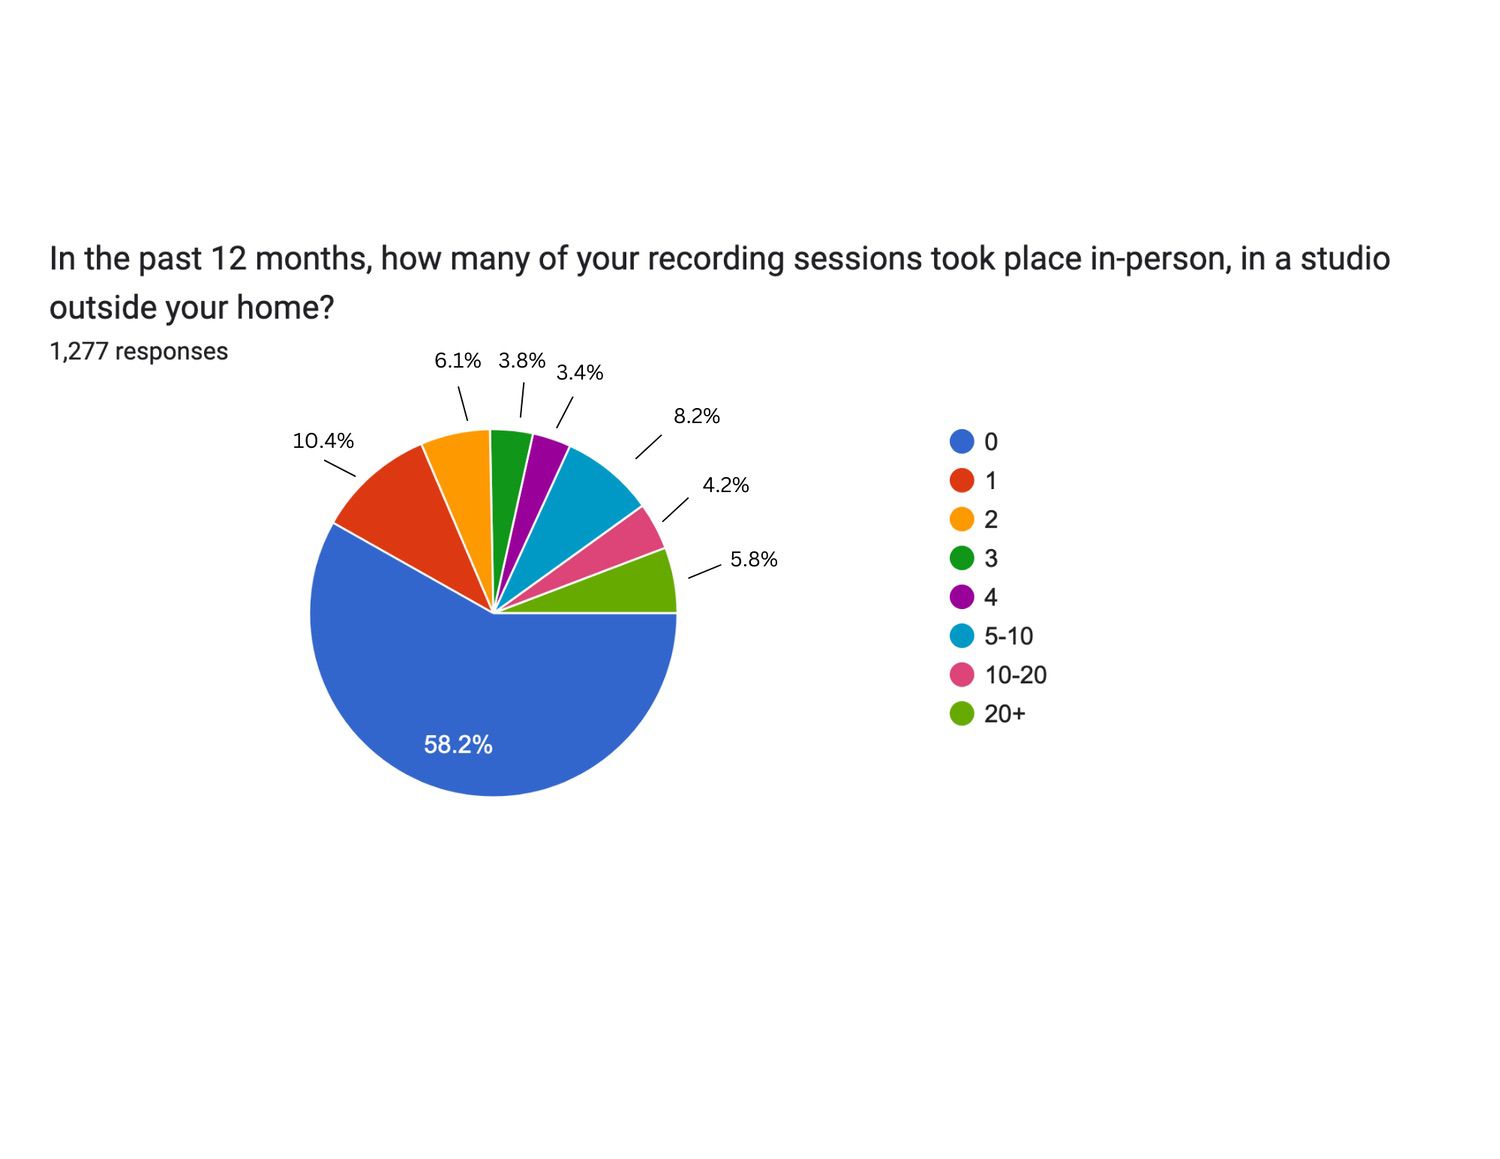 In the past 12 months, how many of your recording sessions took place in-person, in a studio outside your home?